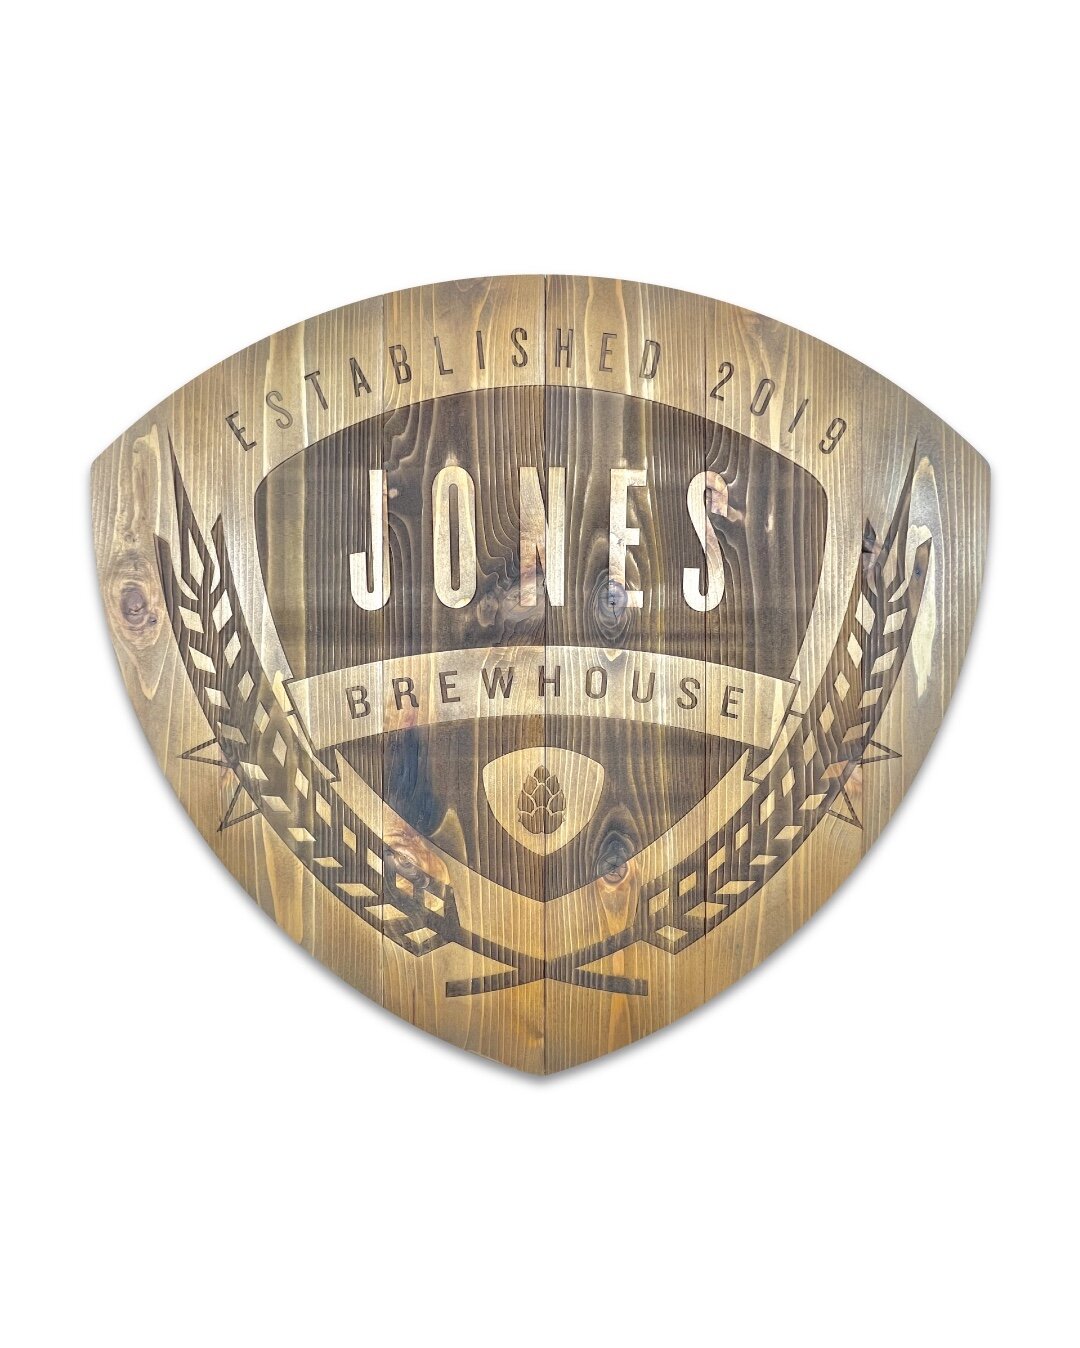 Inspired by a Jones Brewhouse tap handle, this was a logo sign we made for our customer to gift to his client. #LogoSigns #BarSigns #HolidayGifts